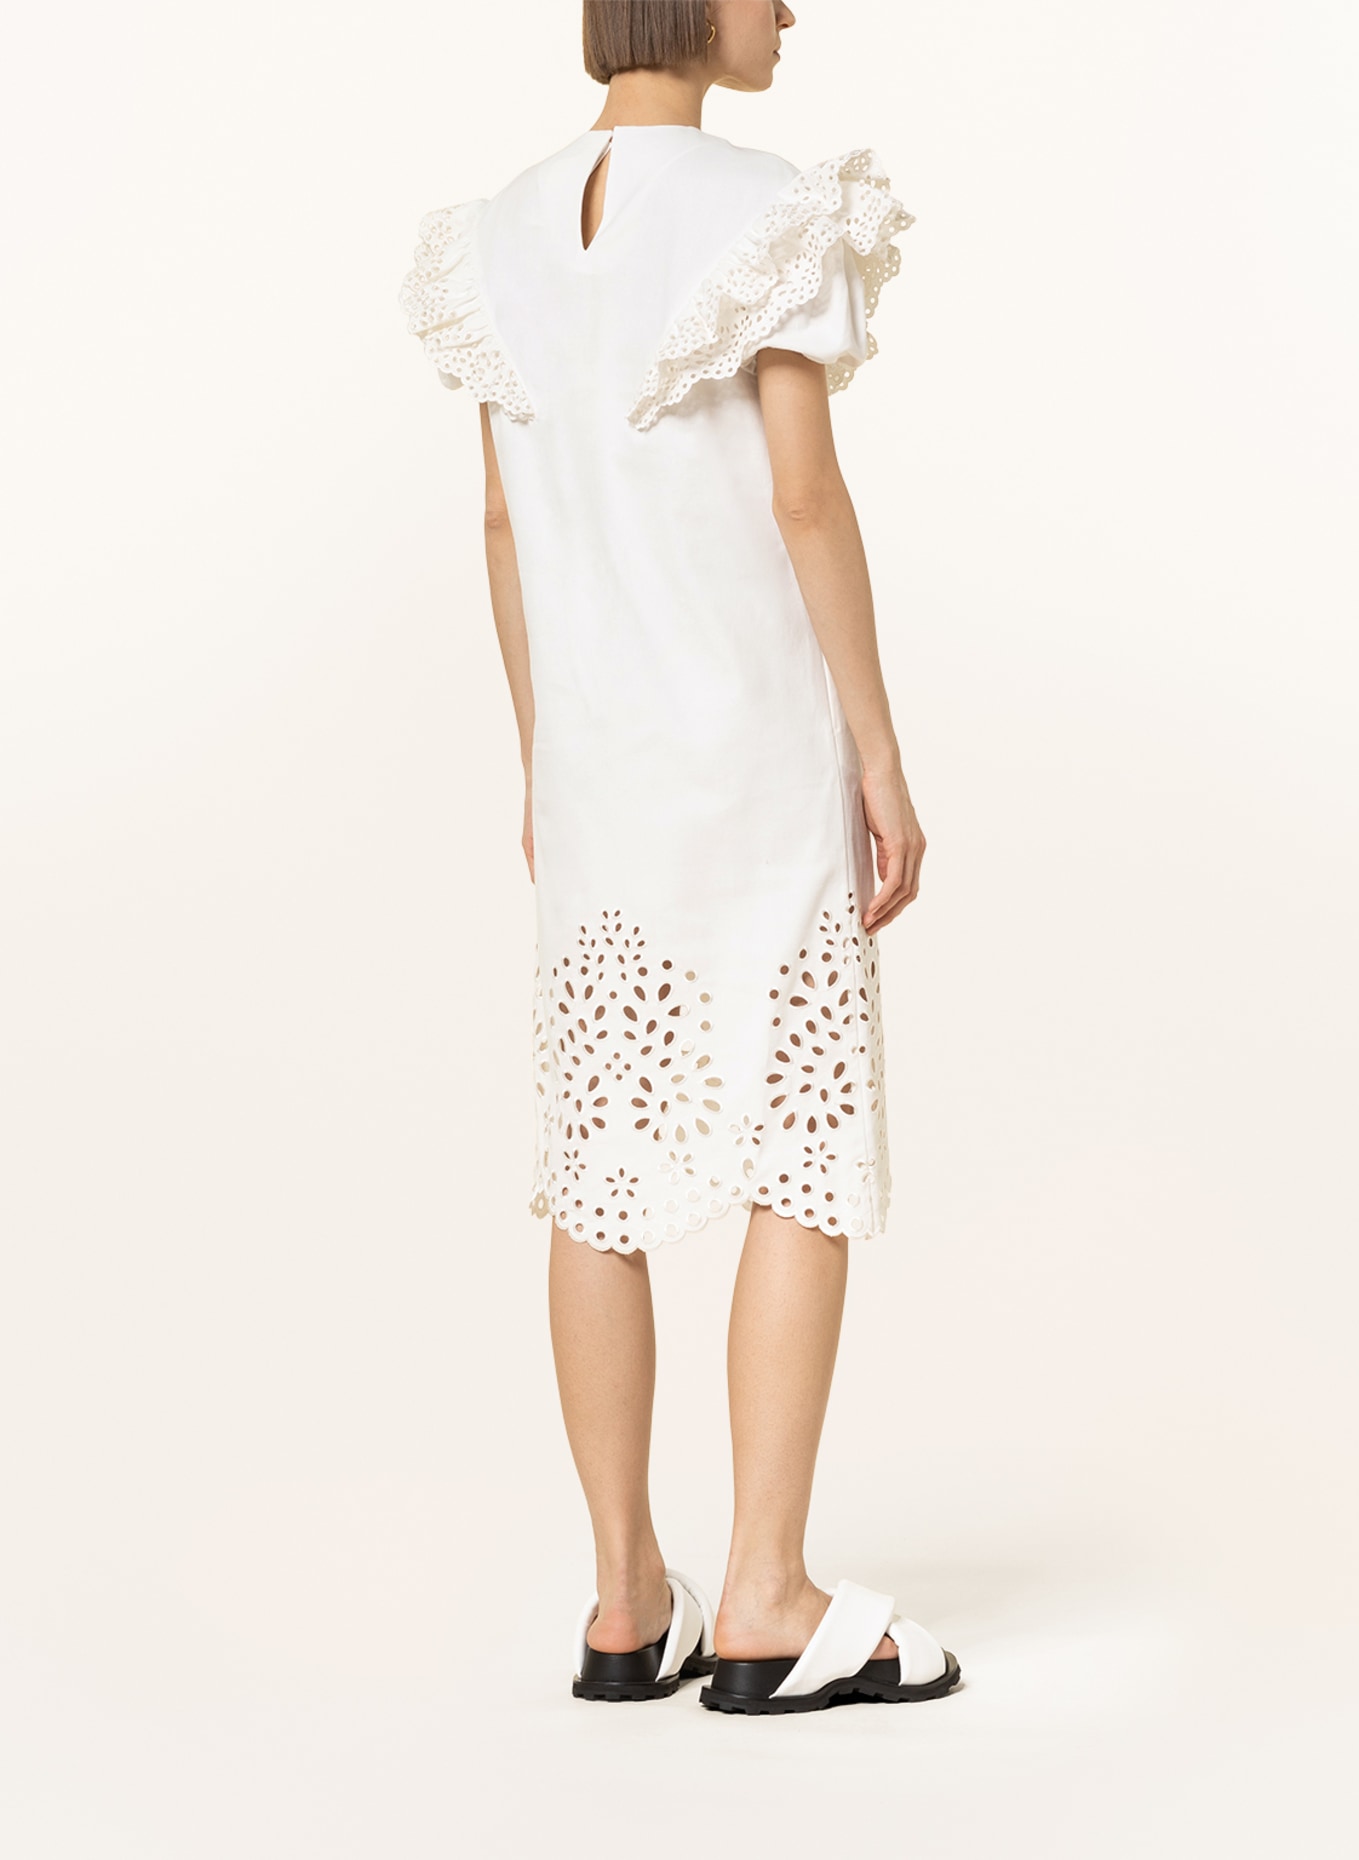 SPORTMAX Dress BANDA with lace and ruffles, Color: ECRU (Image 3)